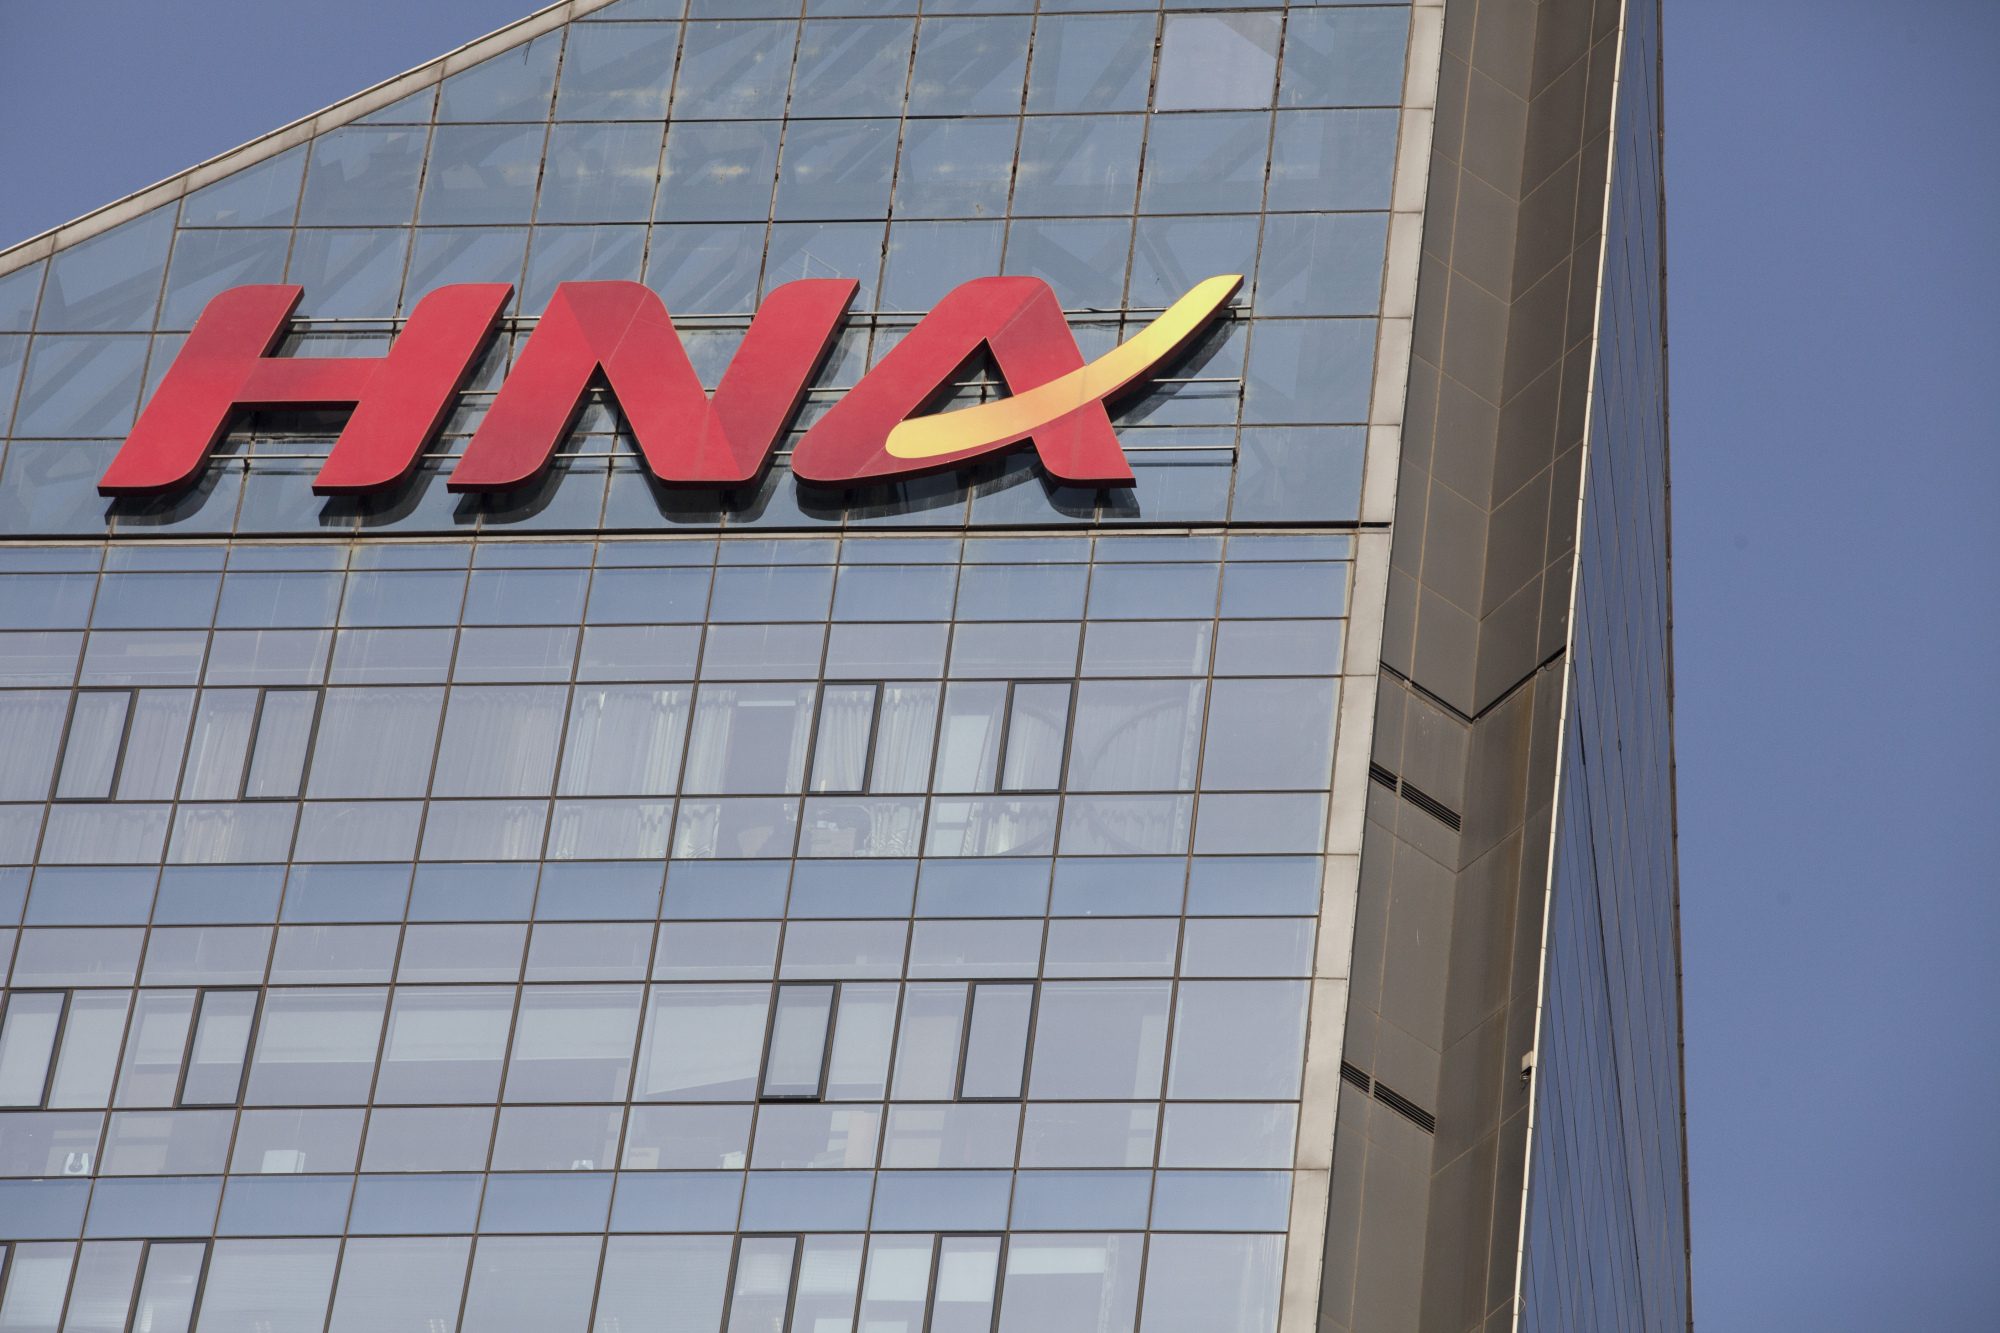 China's HNA Group says creditors have applied for its bankruptcy